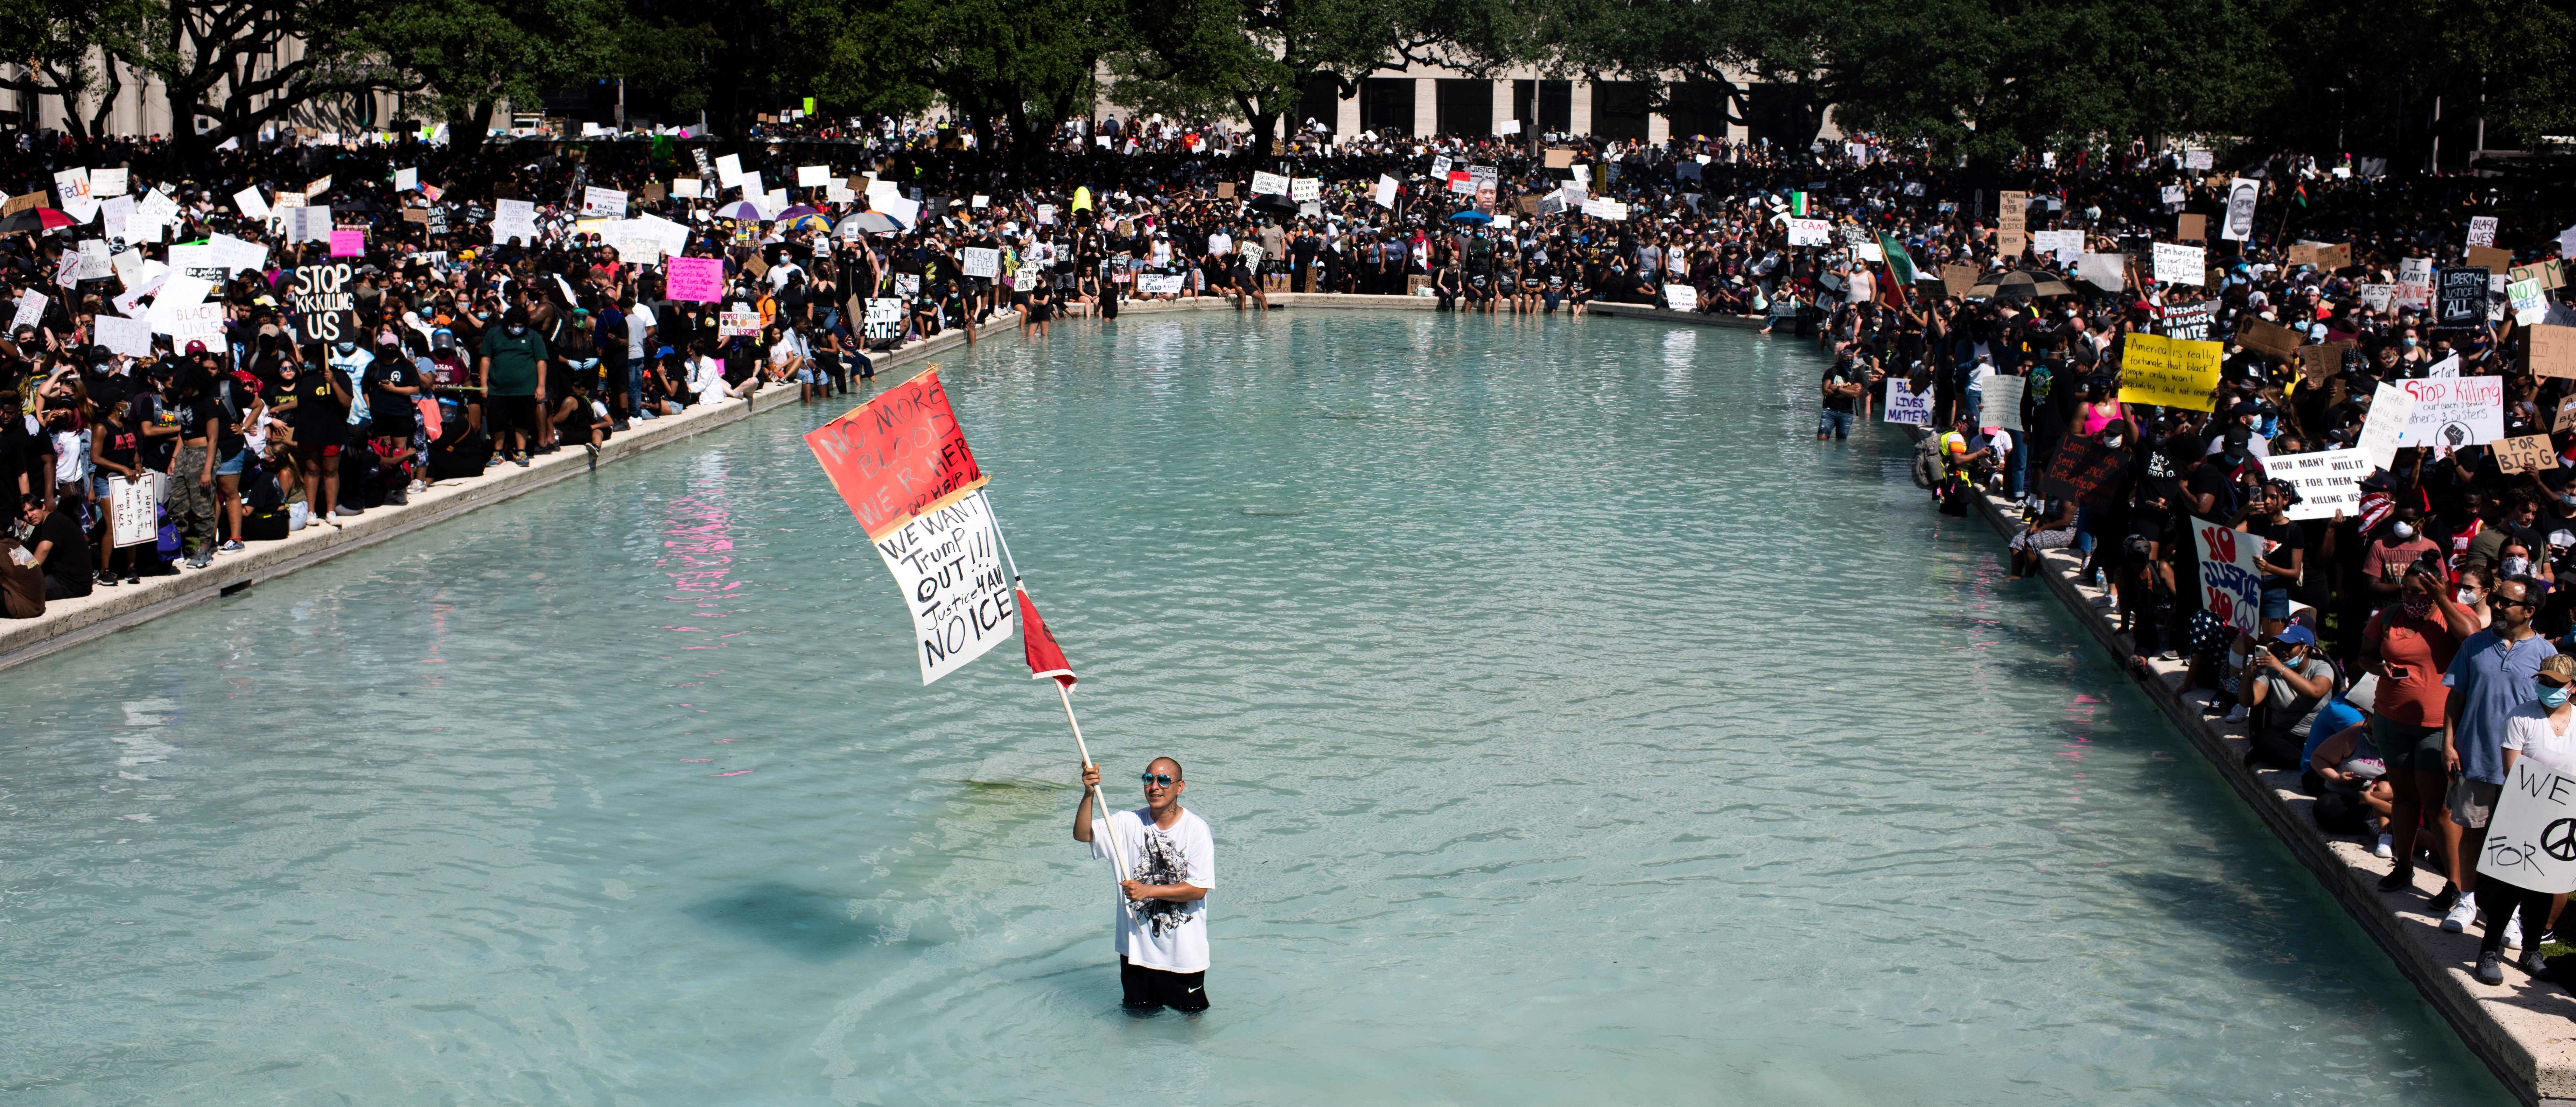 Protesters demonstrate to mourn the death of George Floyd during a march across downtown Houston, Texas, on June 2, 2020. - Anti-racism protests have put several US cities under curfew to suppress rioting, following the death of George Floyd while in police custody. (Photo by Mark Felix / AFP) (Photo by MARK FELIX/AFP via Getty Images)